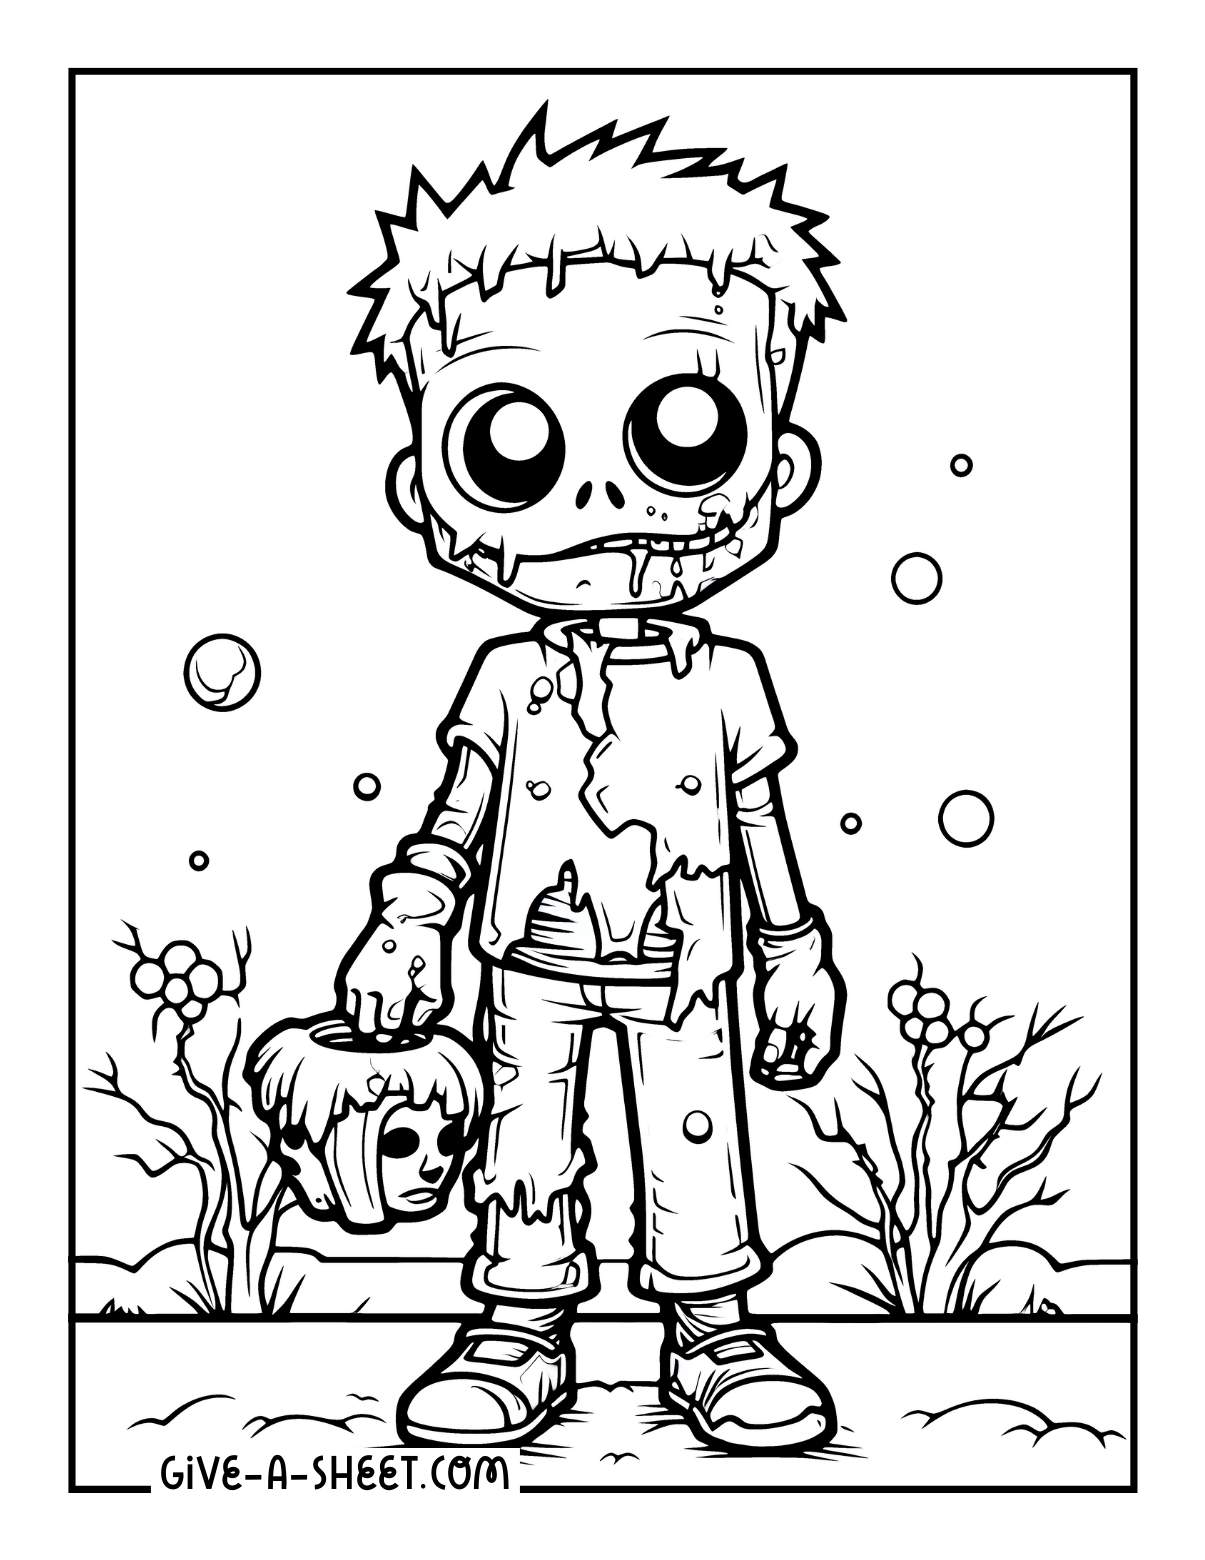 Frankenstein halloween zombie coloring page for kids.